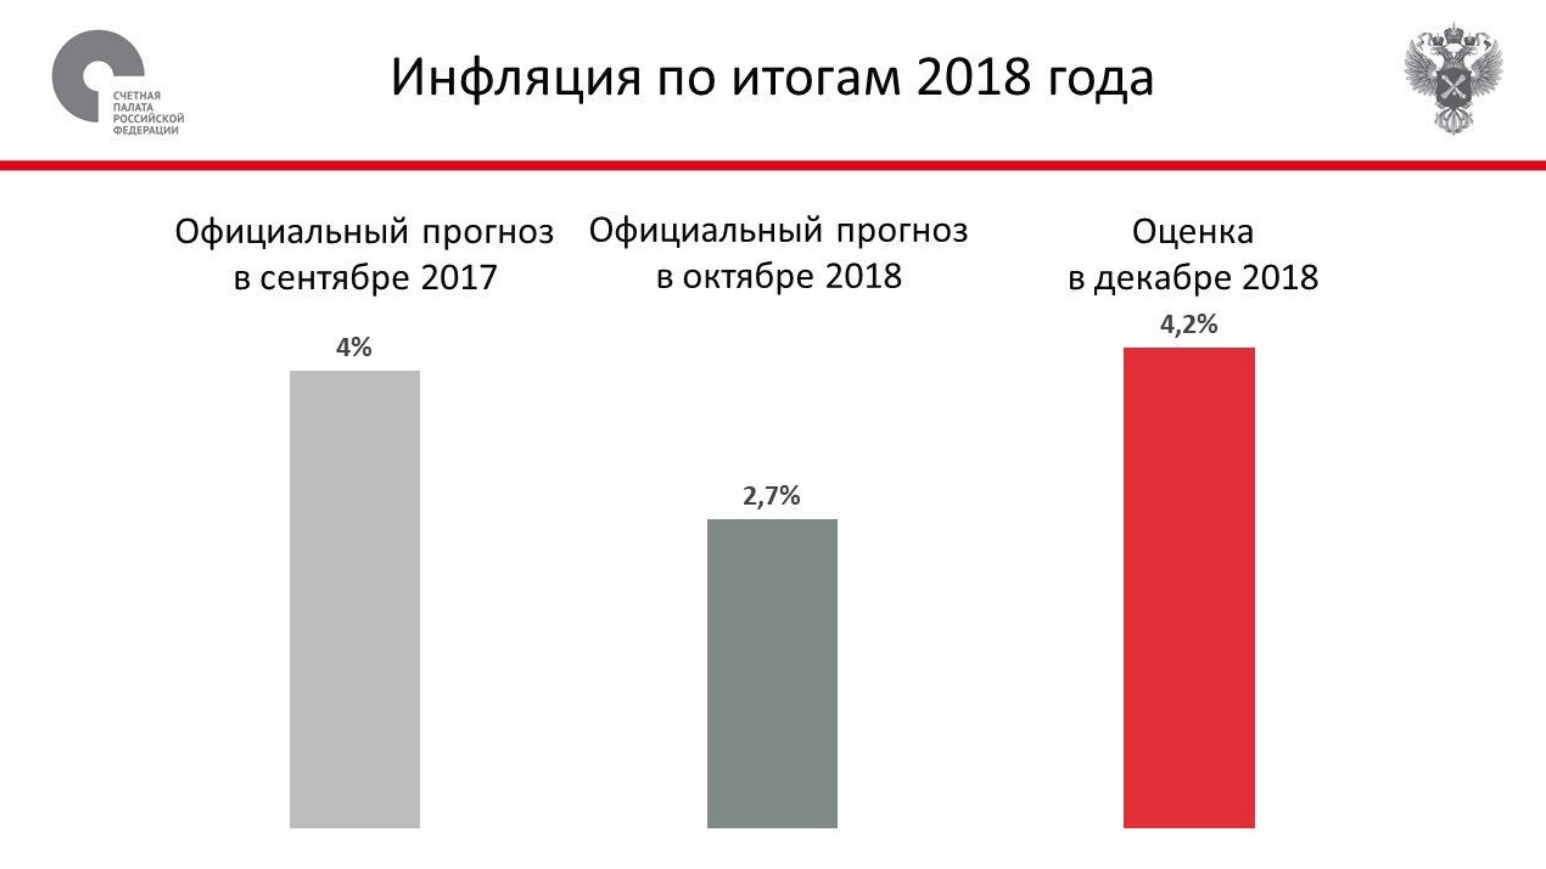 Difference between real inflation in Russia at the end of 2018 and the previous expectations that Russians had for this date. The diagram was officially released by the Accounting Chamber of Russia on January 3, 2019.